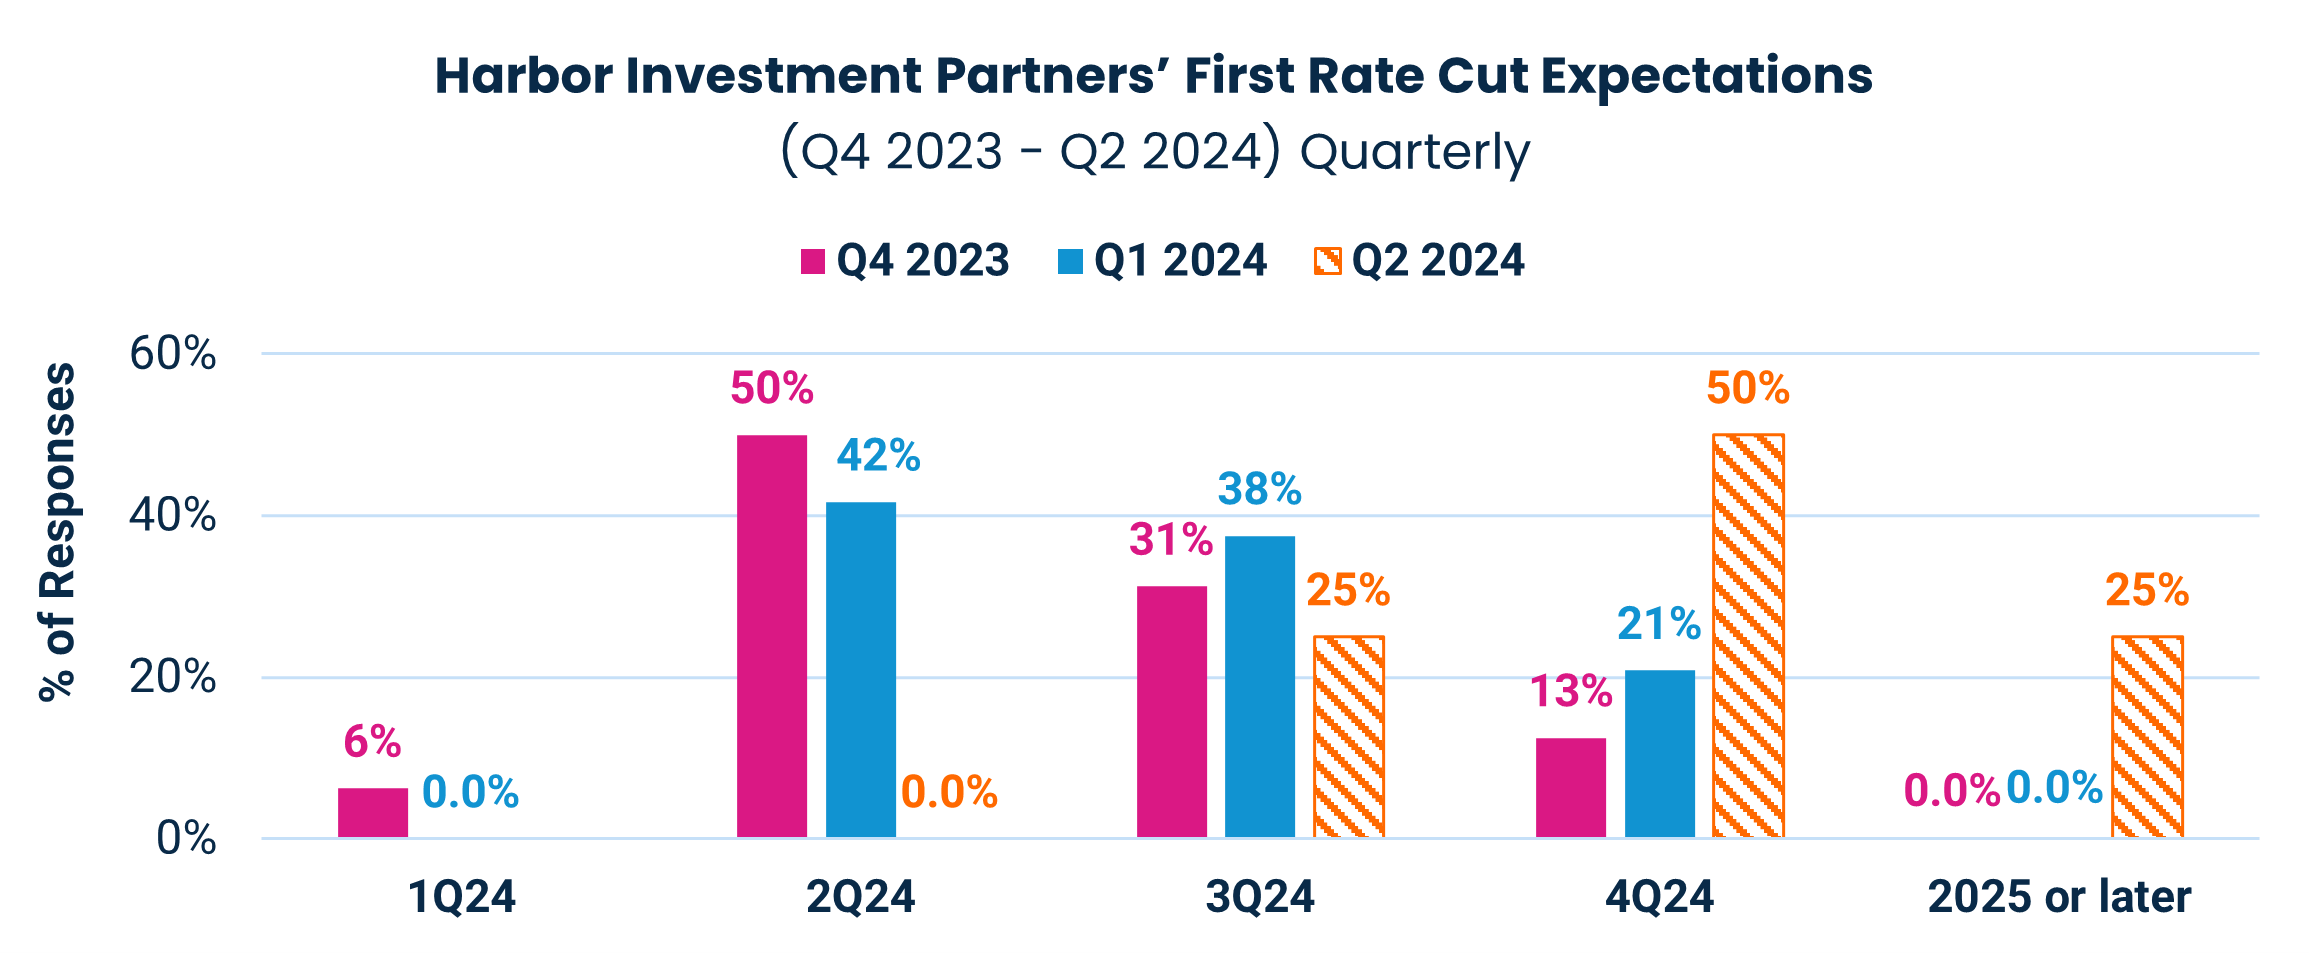 Harbor Investment Partners’ First Rate Cut Expectations
(Q4 2023 - Q2 2024) Quarterly